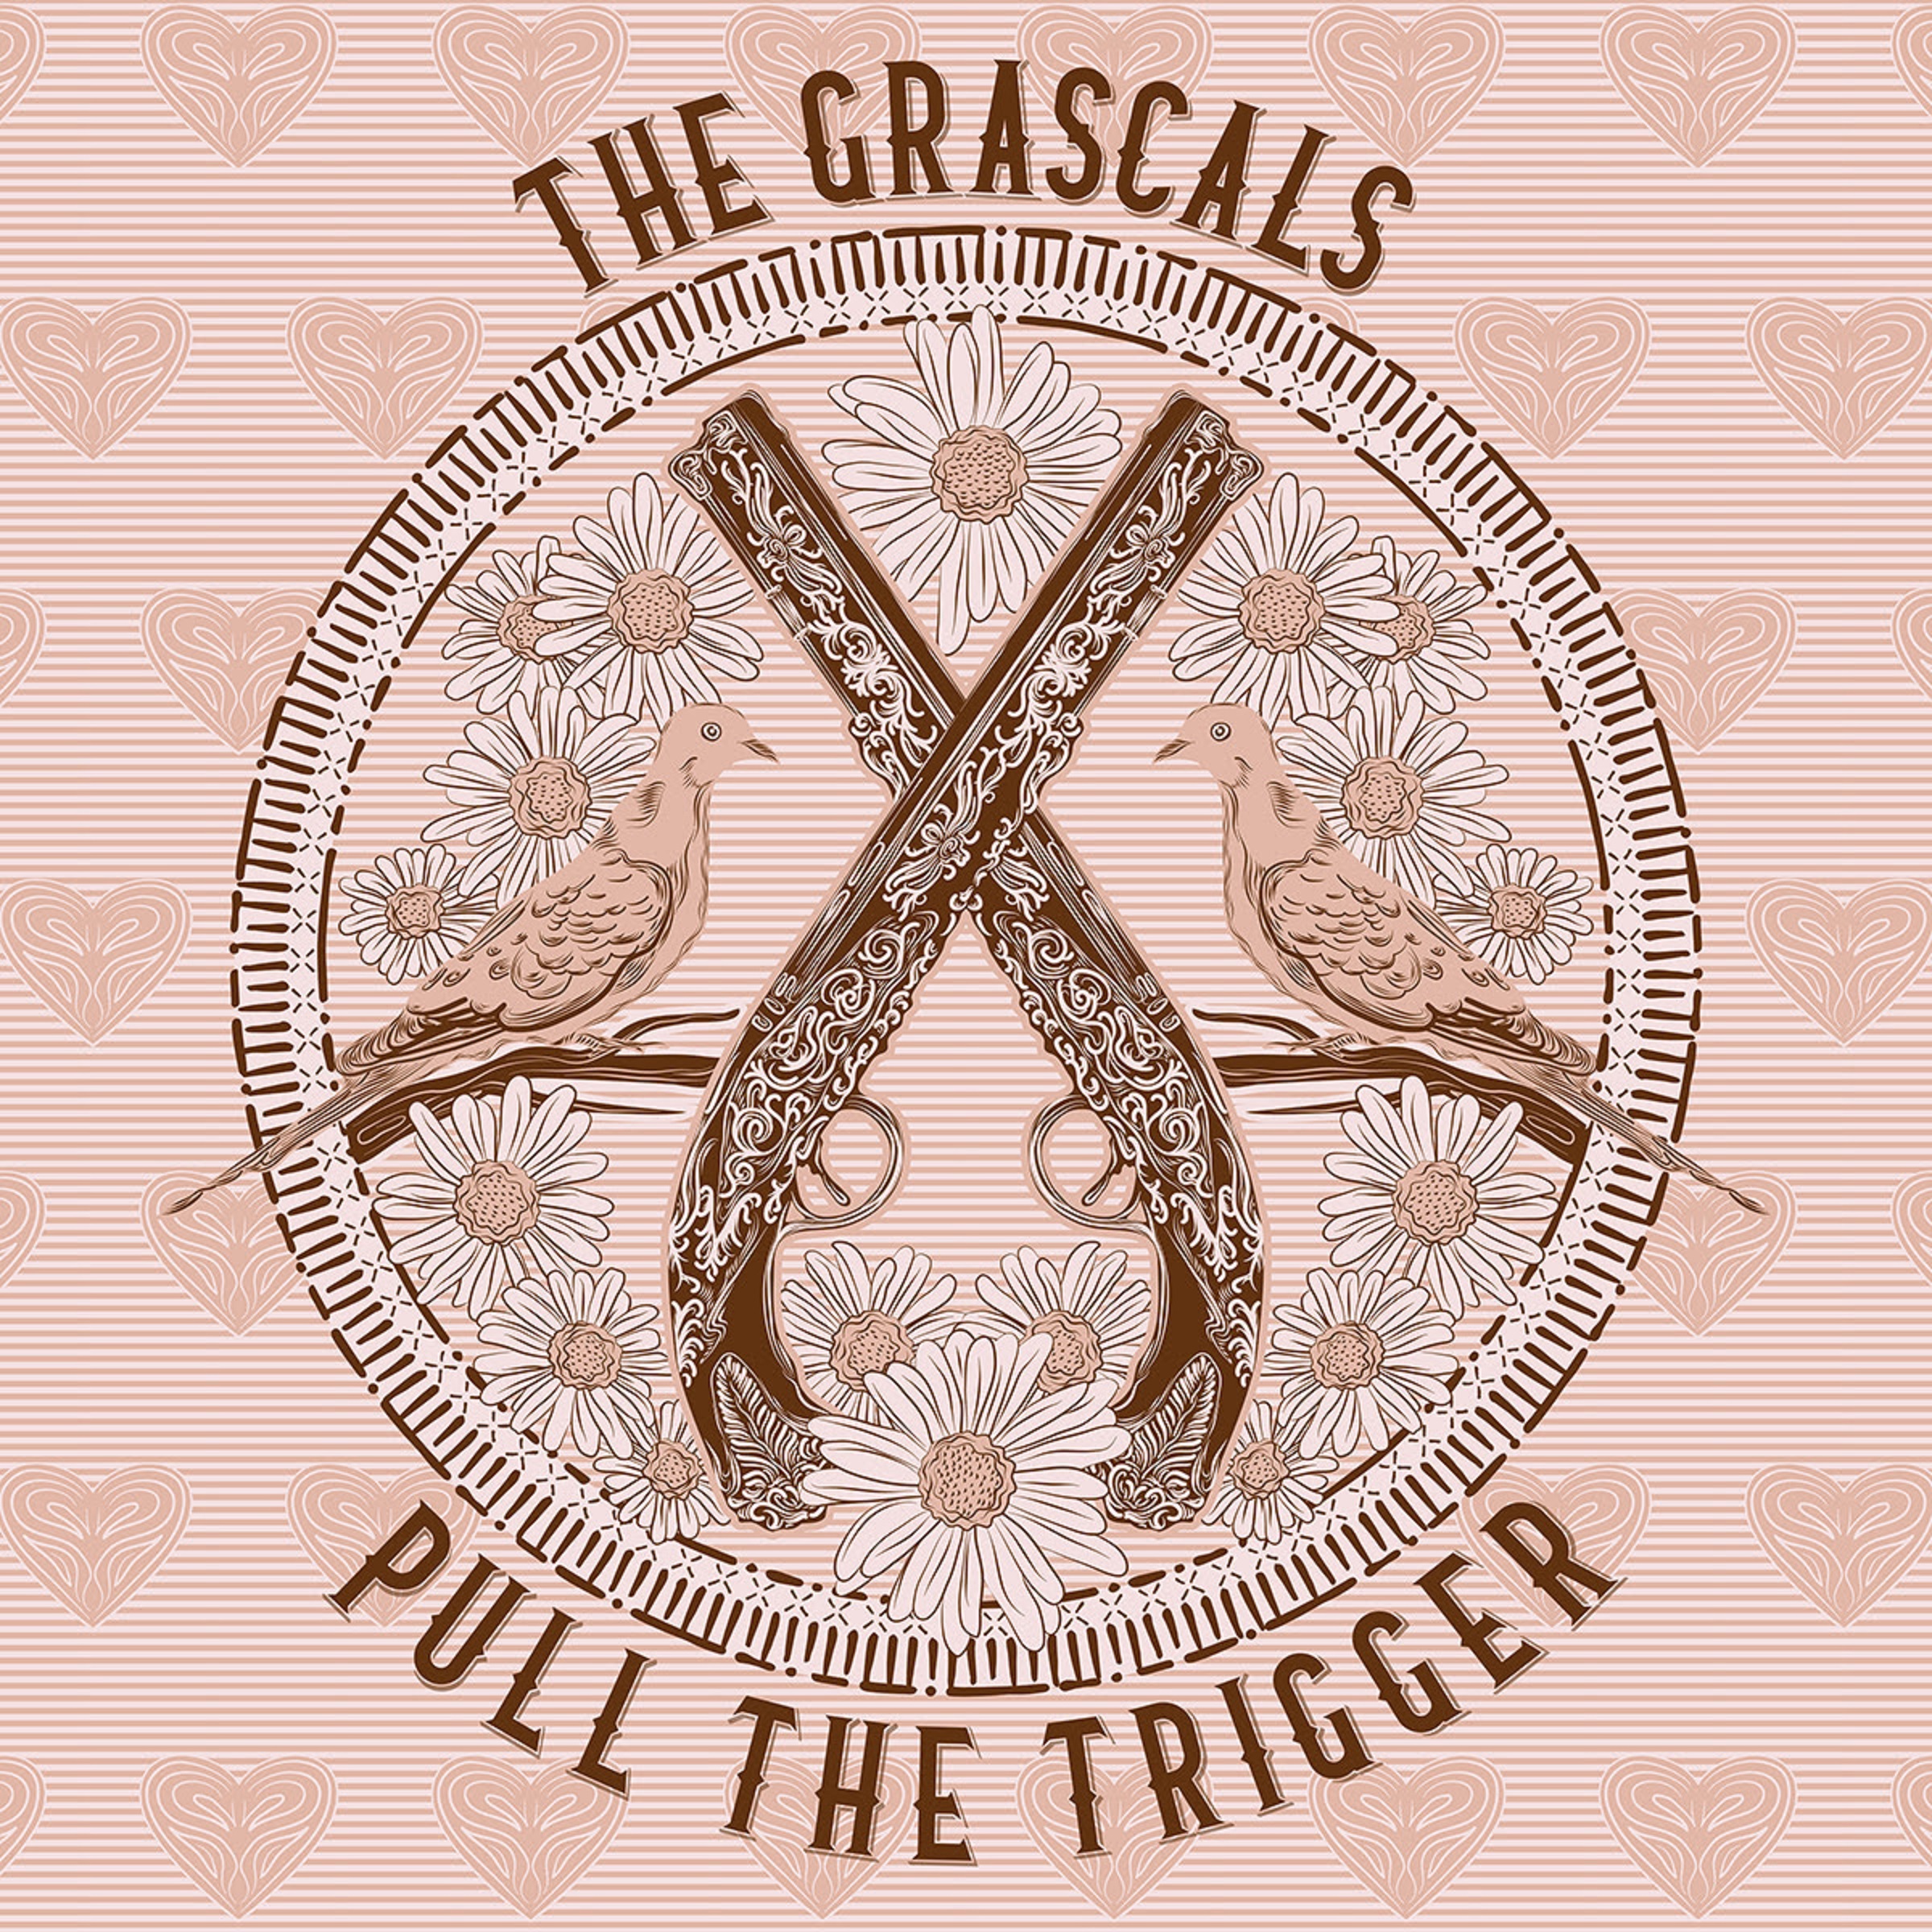 The Grascals bring driving bluegrass energy to “Pull The Trigger”